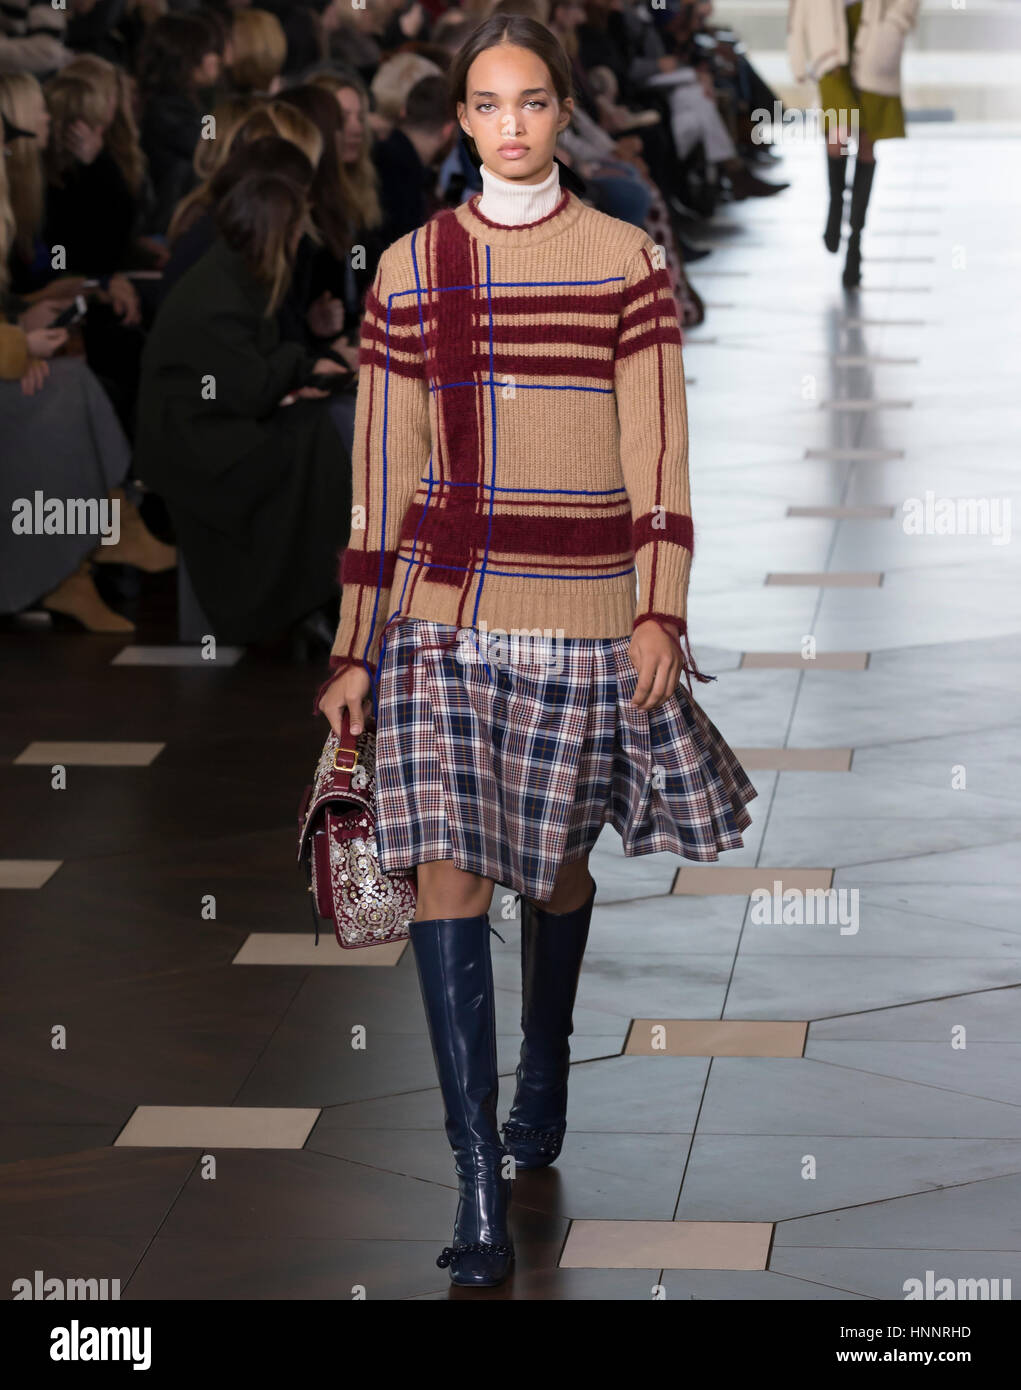 NEW YORK, NY - FEBRUARY 14, 2017: Ellen Rosa walks the runway at the Tory Burch Fall Winter 2017 fashion show during New York Fashion Week at the Whit Stock Photo